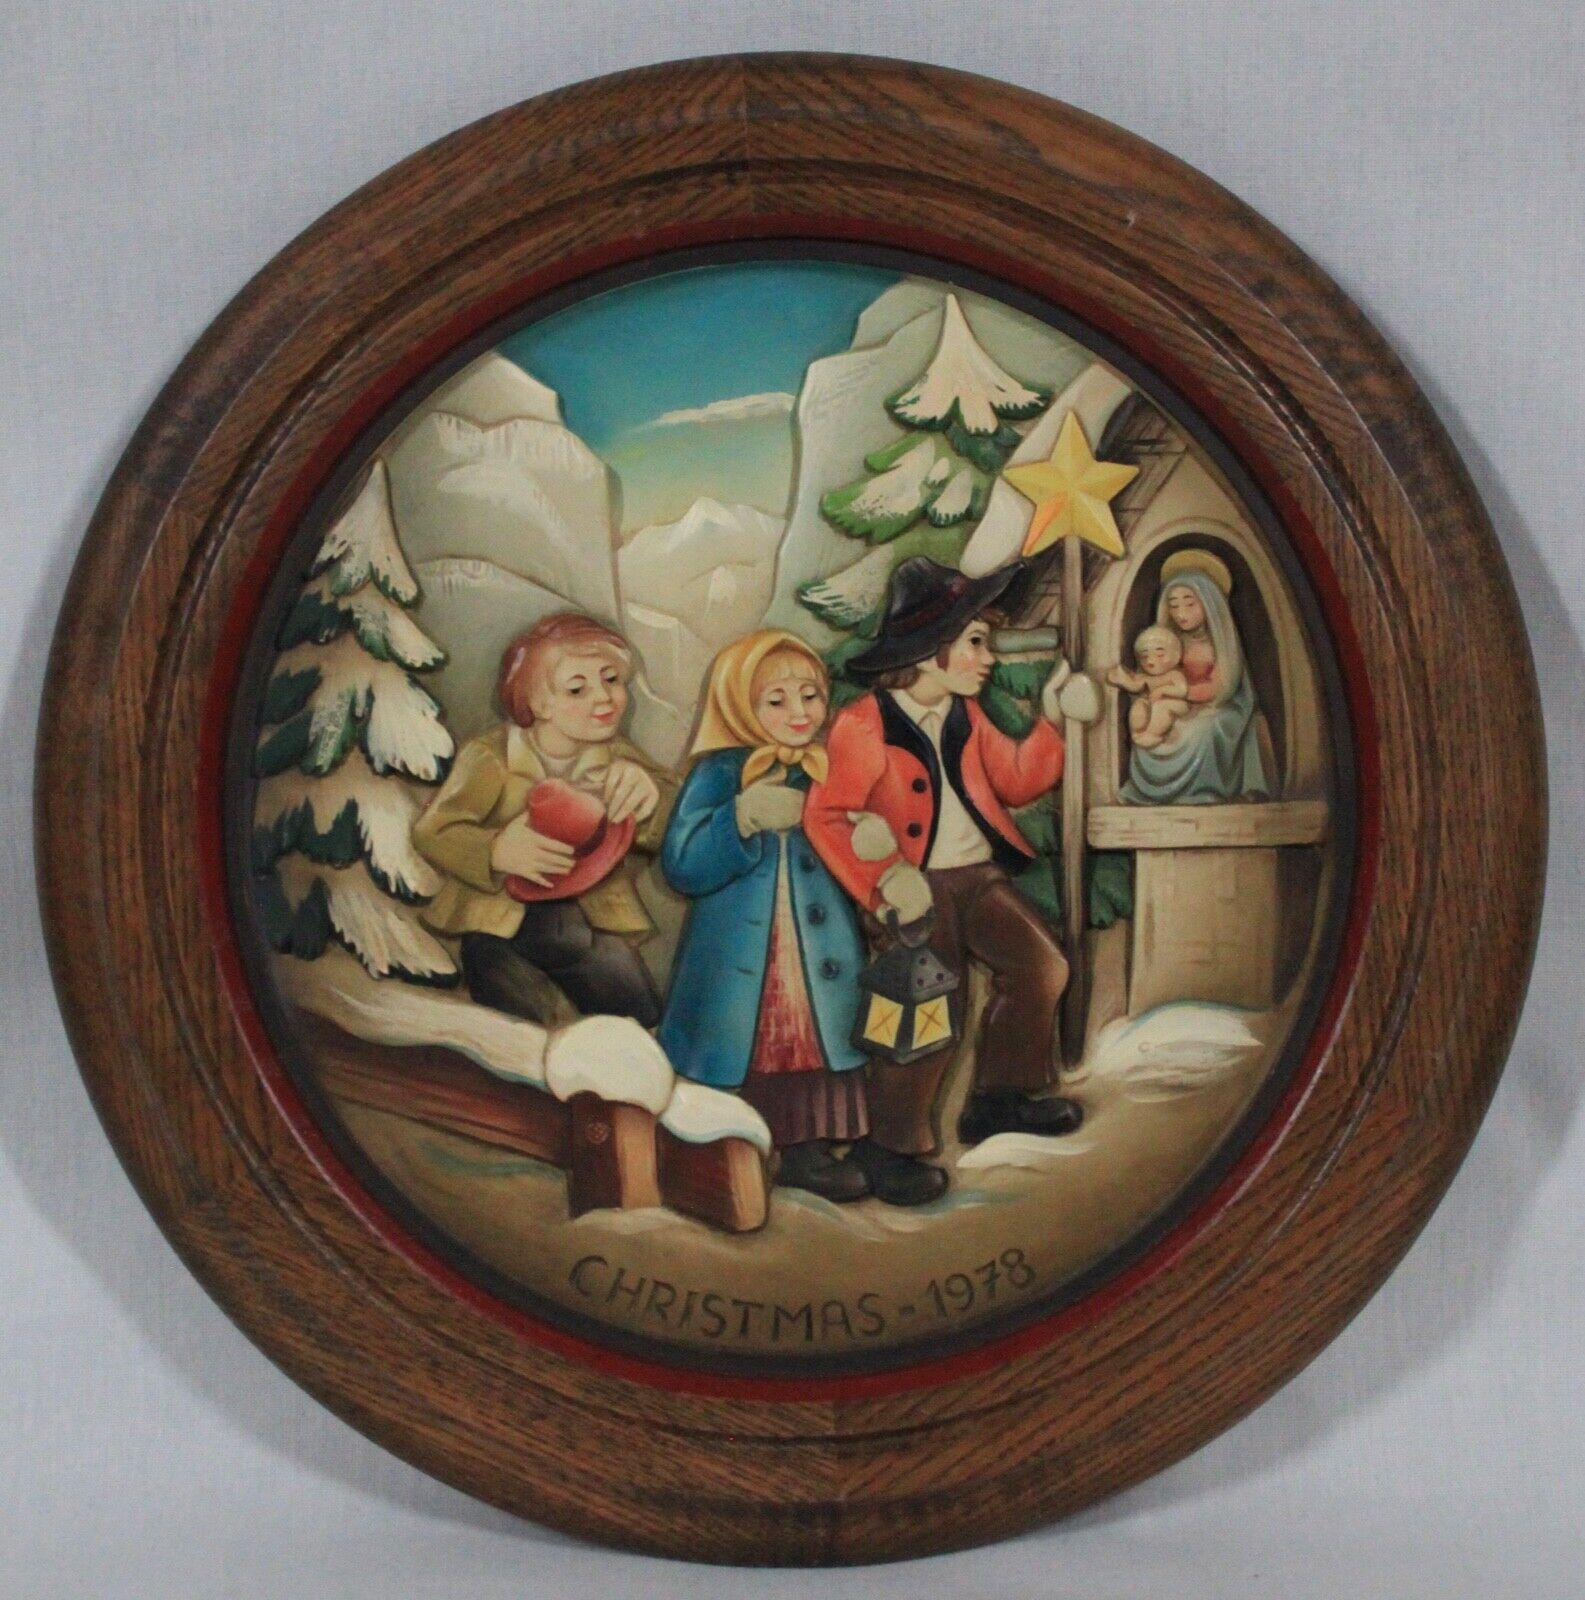 ANRI  1978 “CHRISTMAS IN AUSTRIA” 11” HAND CRAFTED WOOD PLATE LE #672